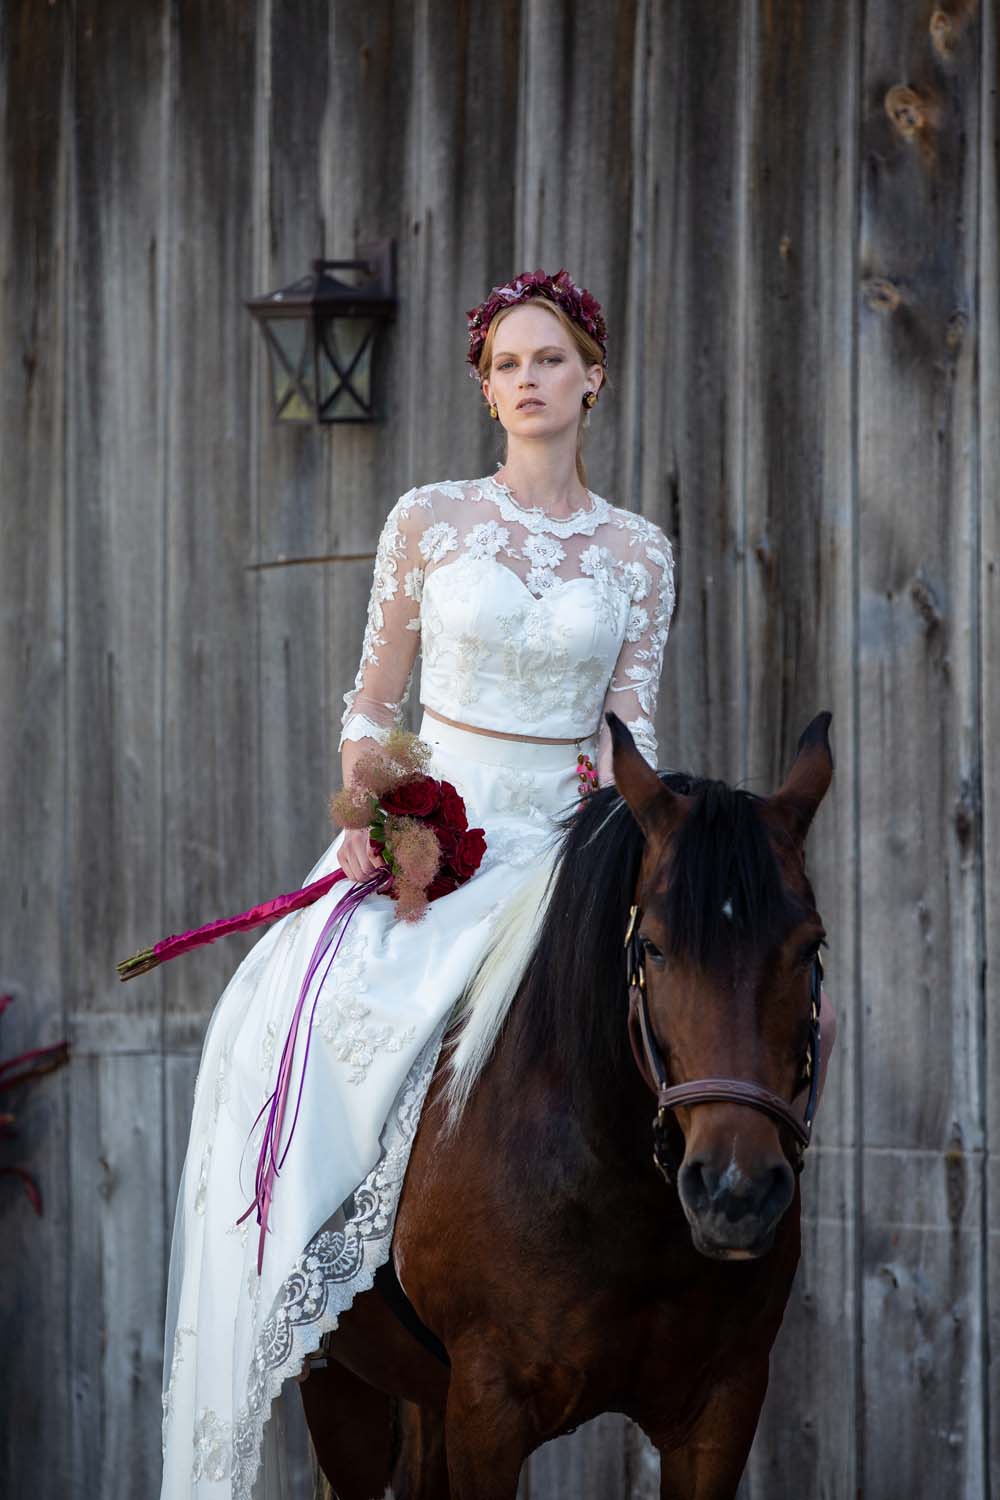 This Styled Shoot Was Inspired By Medieval Royalty - Bride and horse